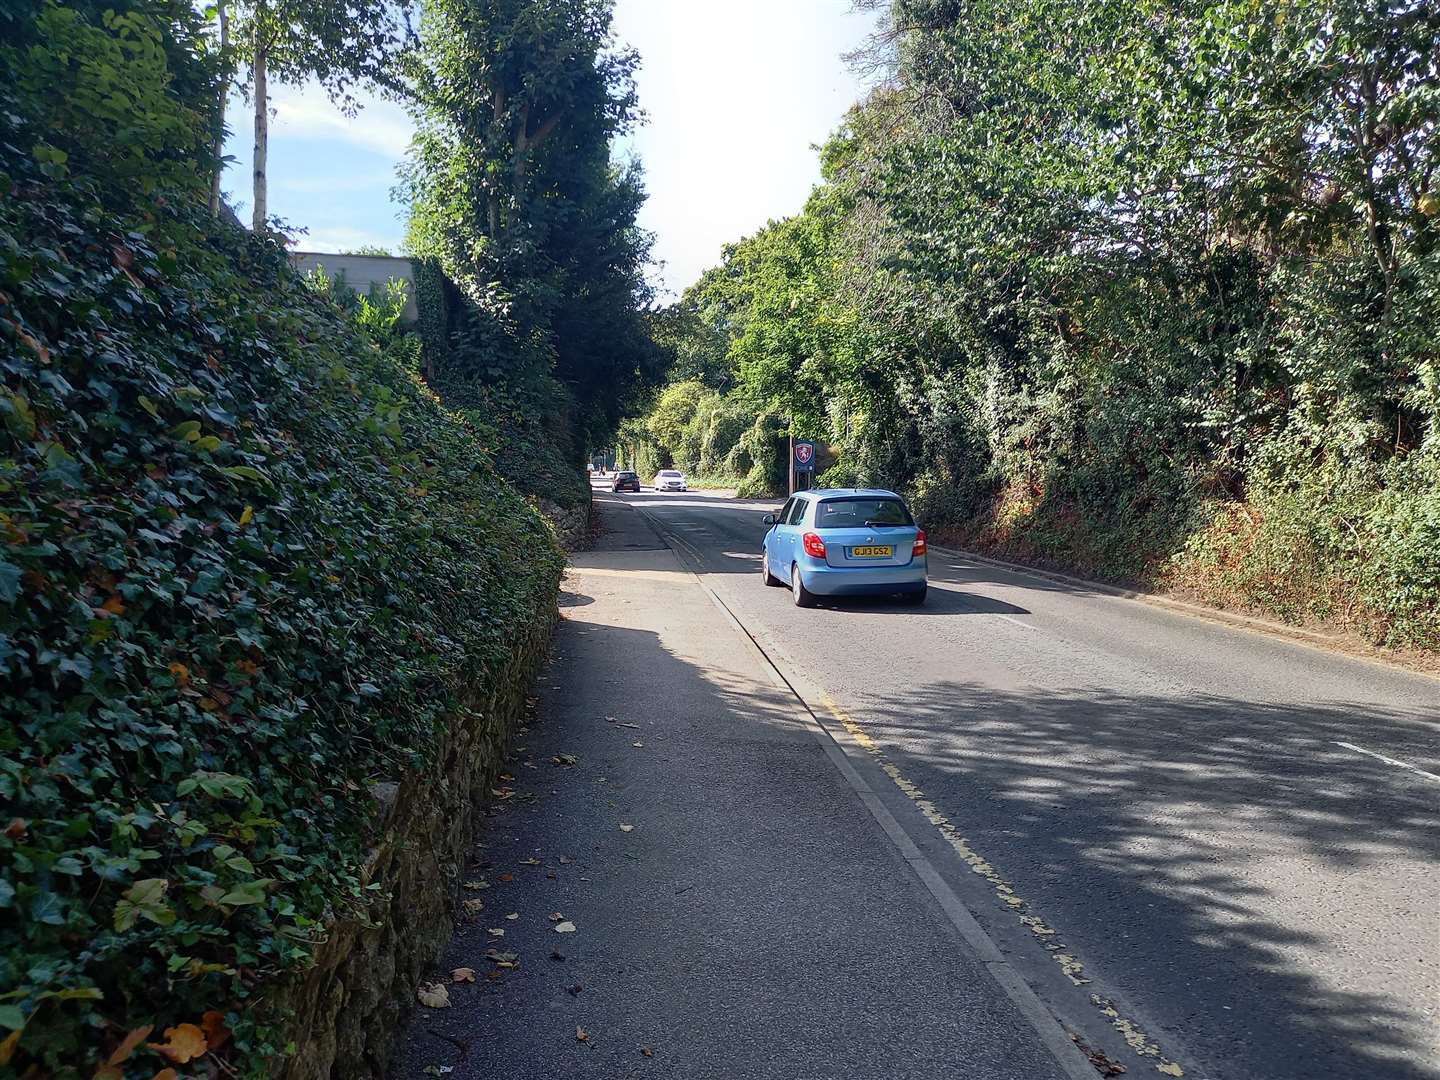 Nackington Road is a key road in and out of the city